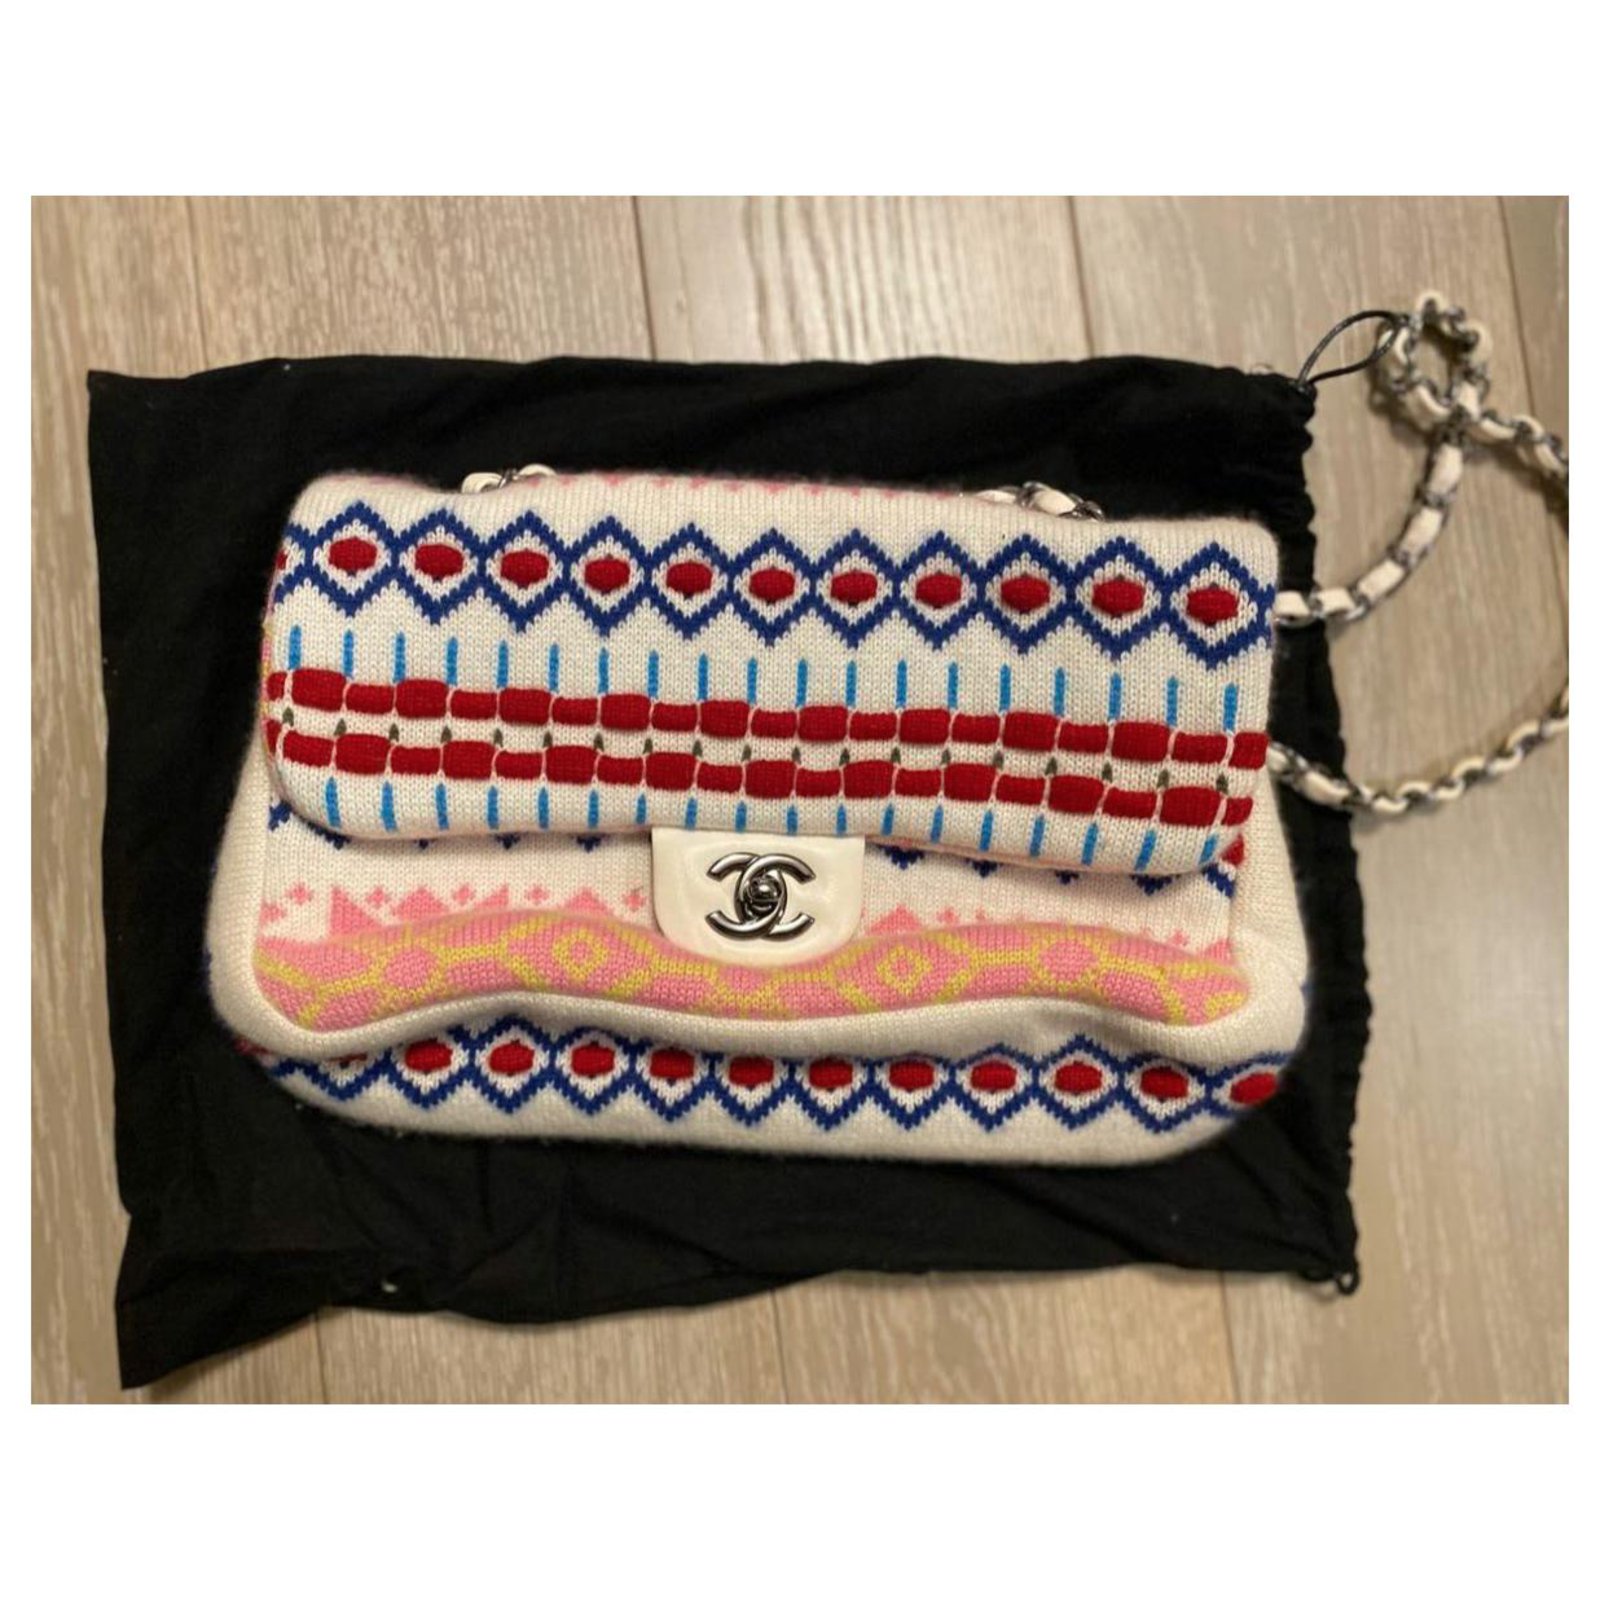 Chanel Classic Cashmere Medium Multicolor Flap bag Pink White Red